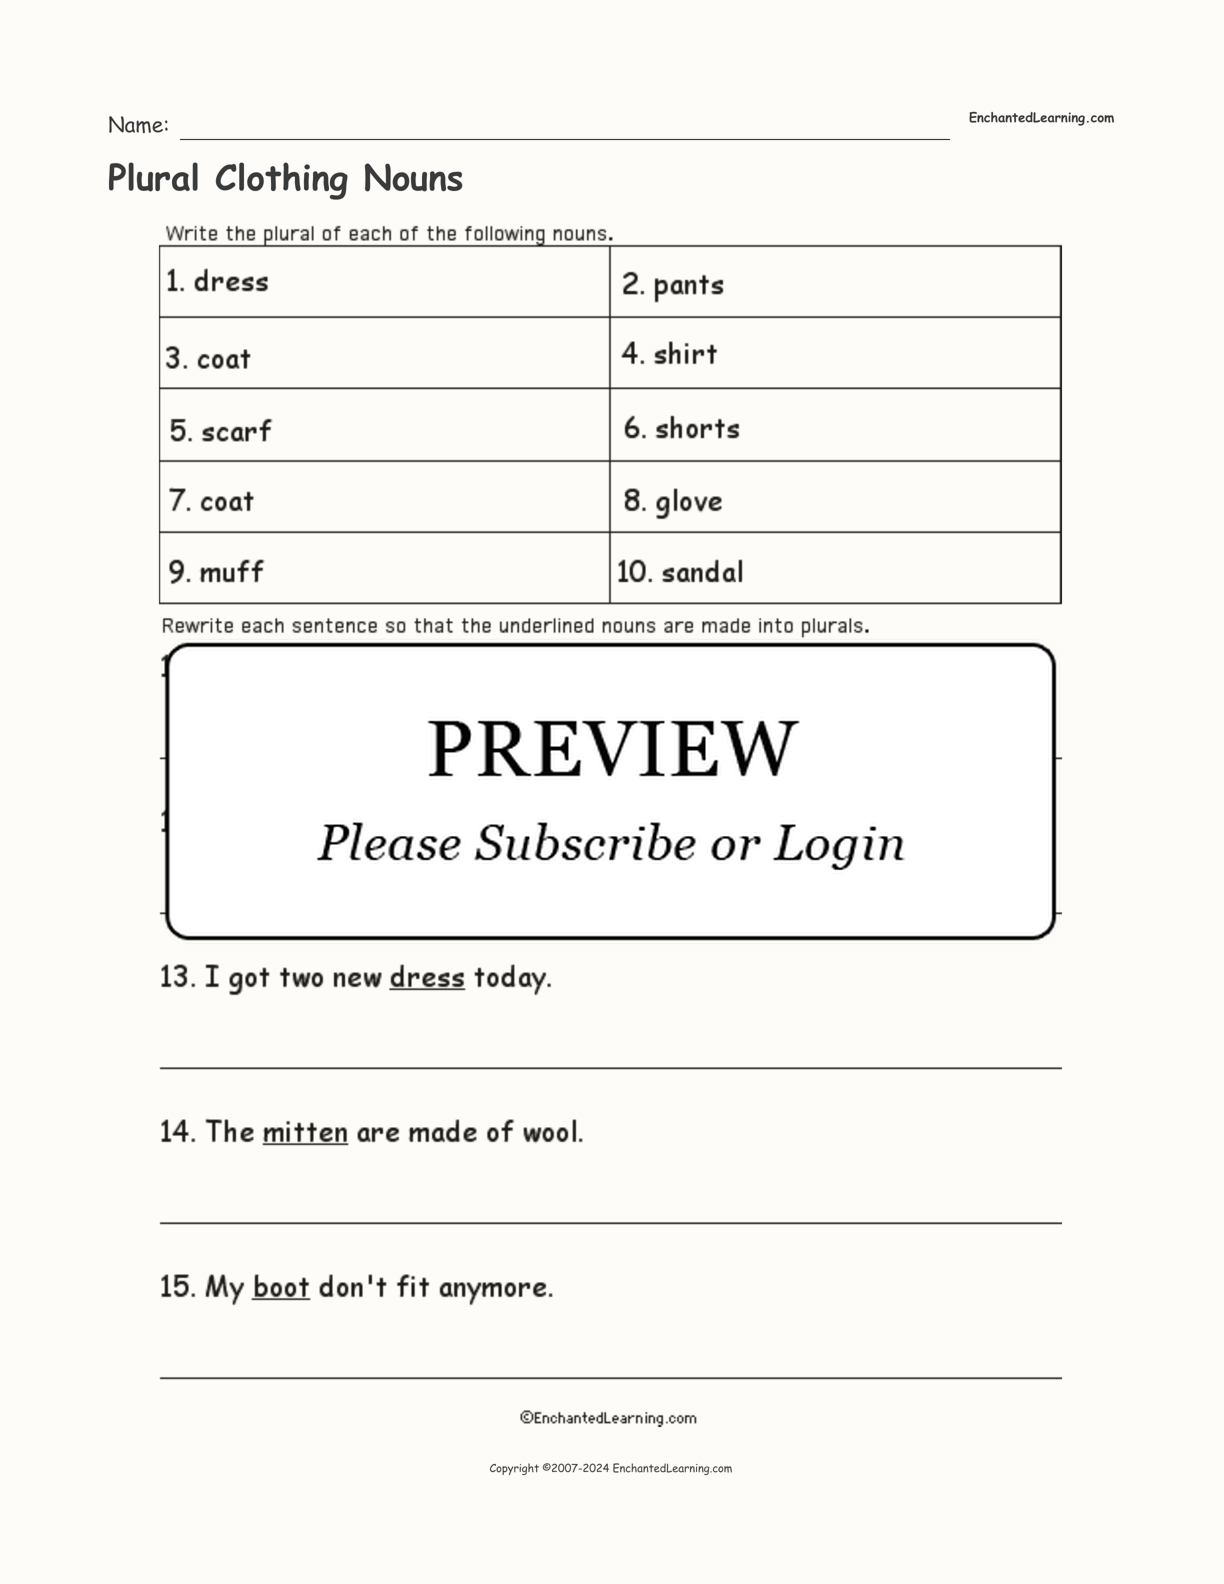 Plural Clothing Nouns interactive worksheet page 1